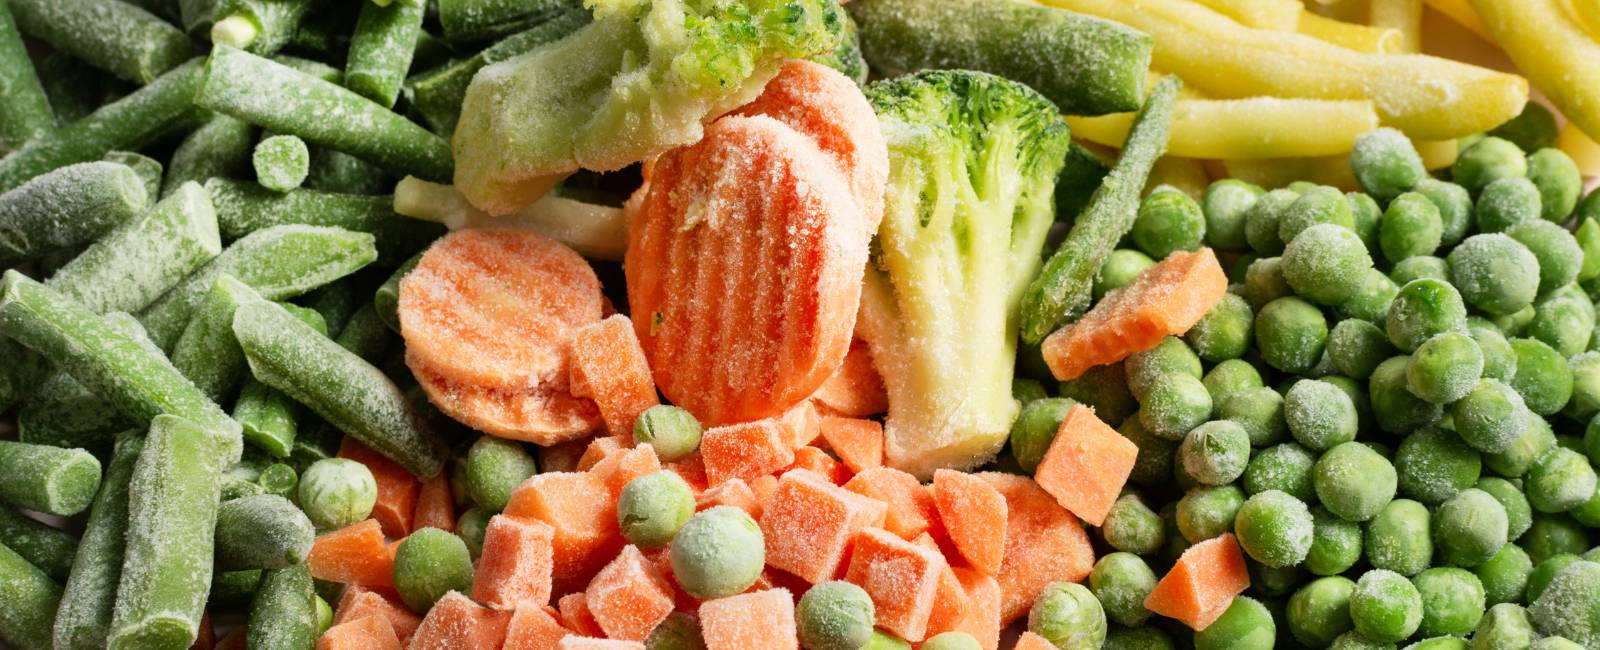 Frozen Fruits and Vegetables: Are They Really Good?